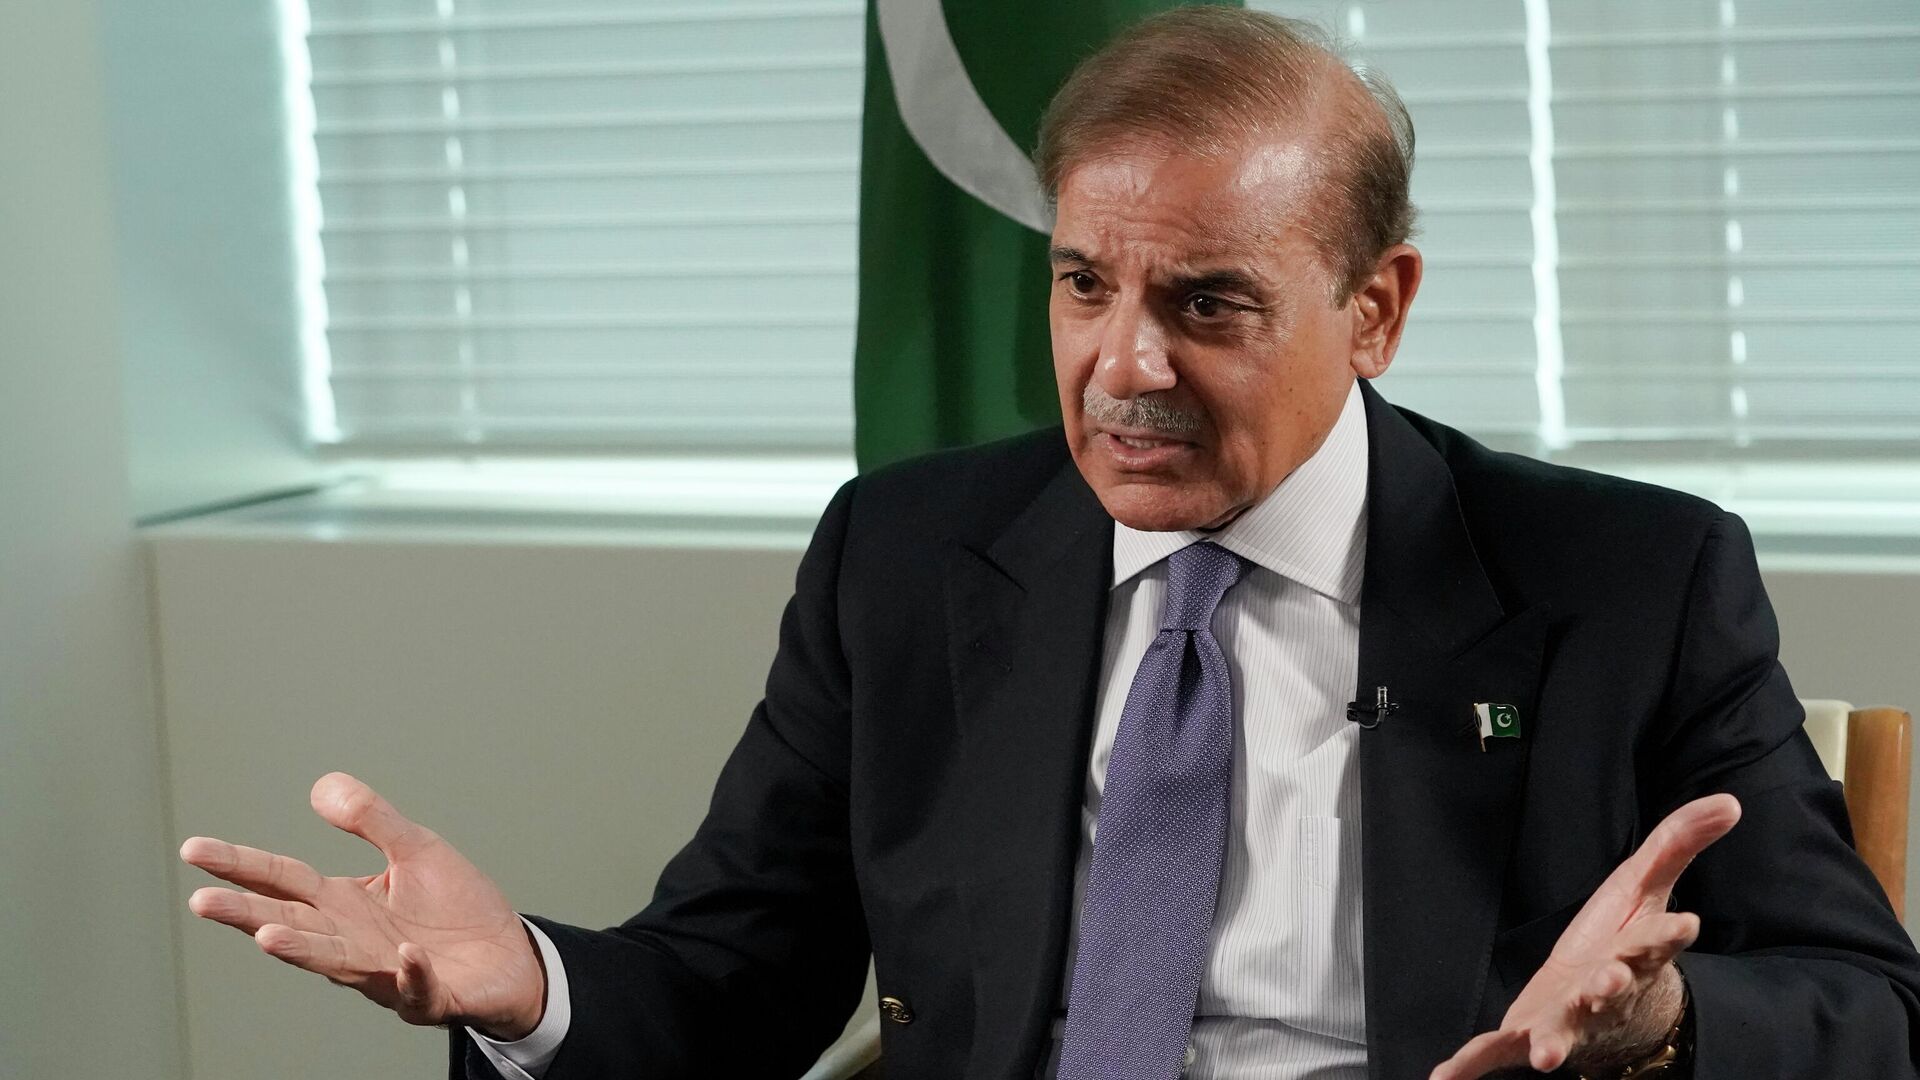 Prime Minister of Pakistan Shehbaz Sharif speaks during an interview with The Associated Press, Thursday, Sept. 22, 2022 at United Nations headquarters. - Sputnik India, 1920, 27.12.2022